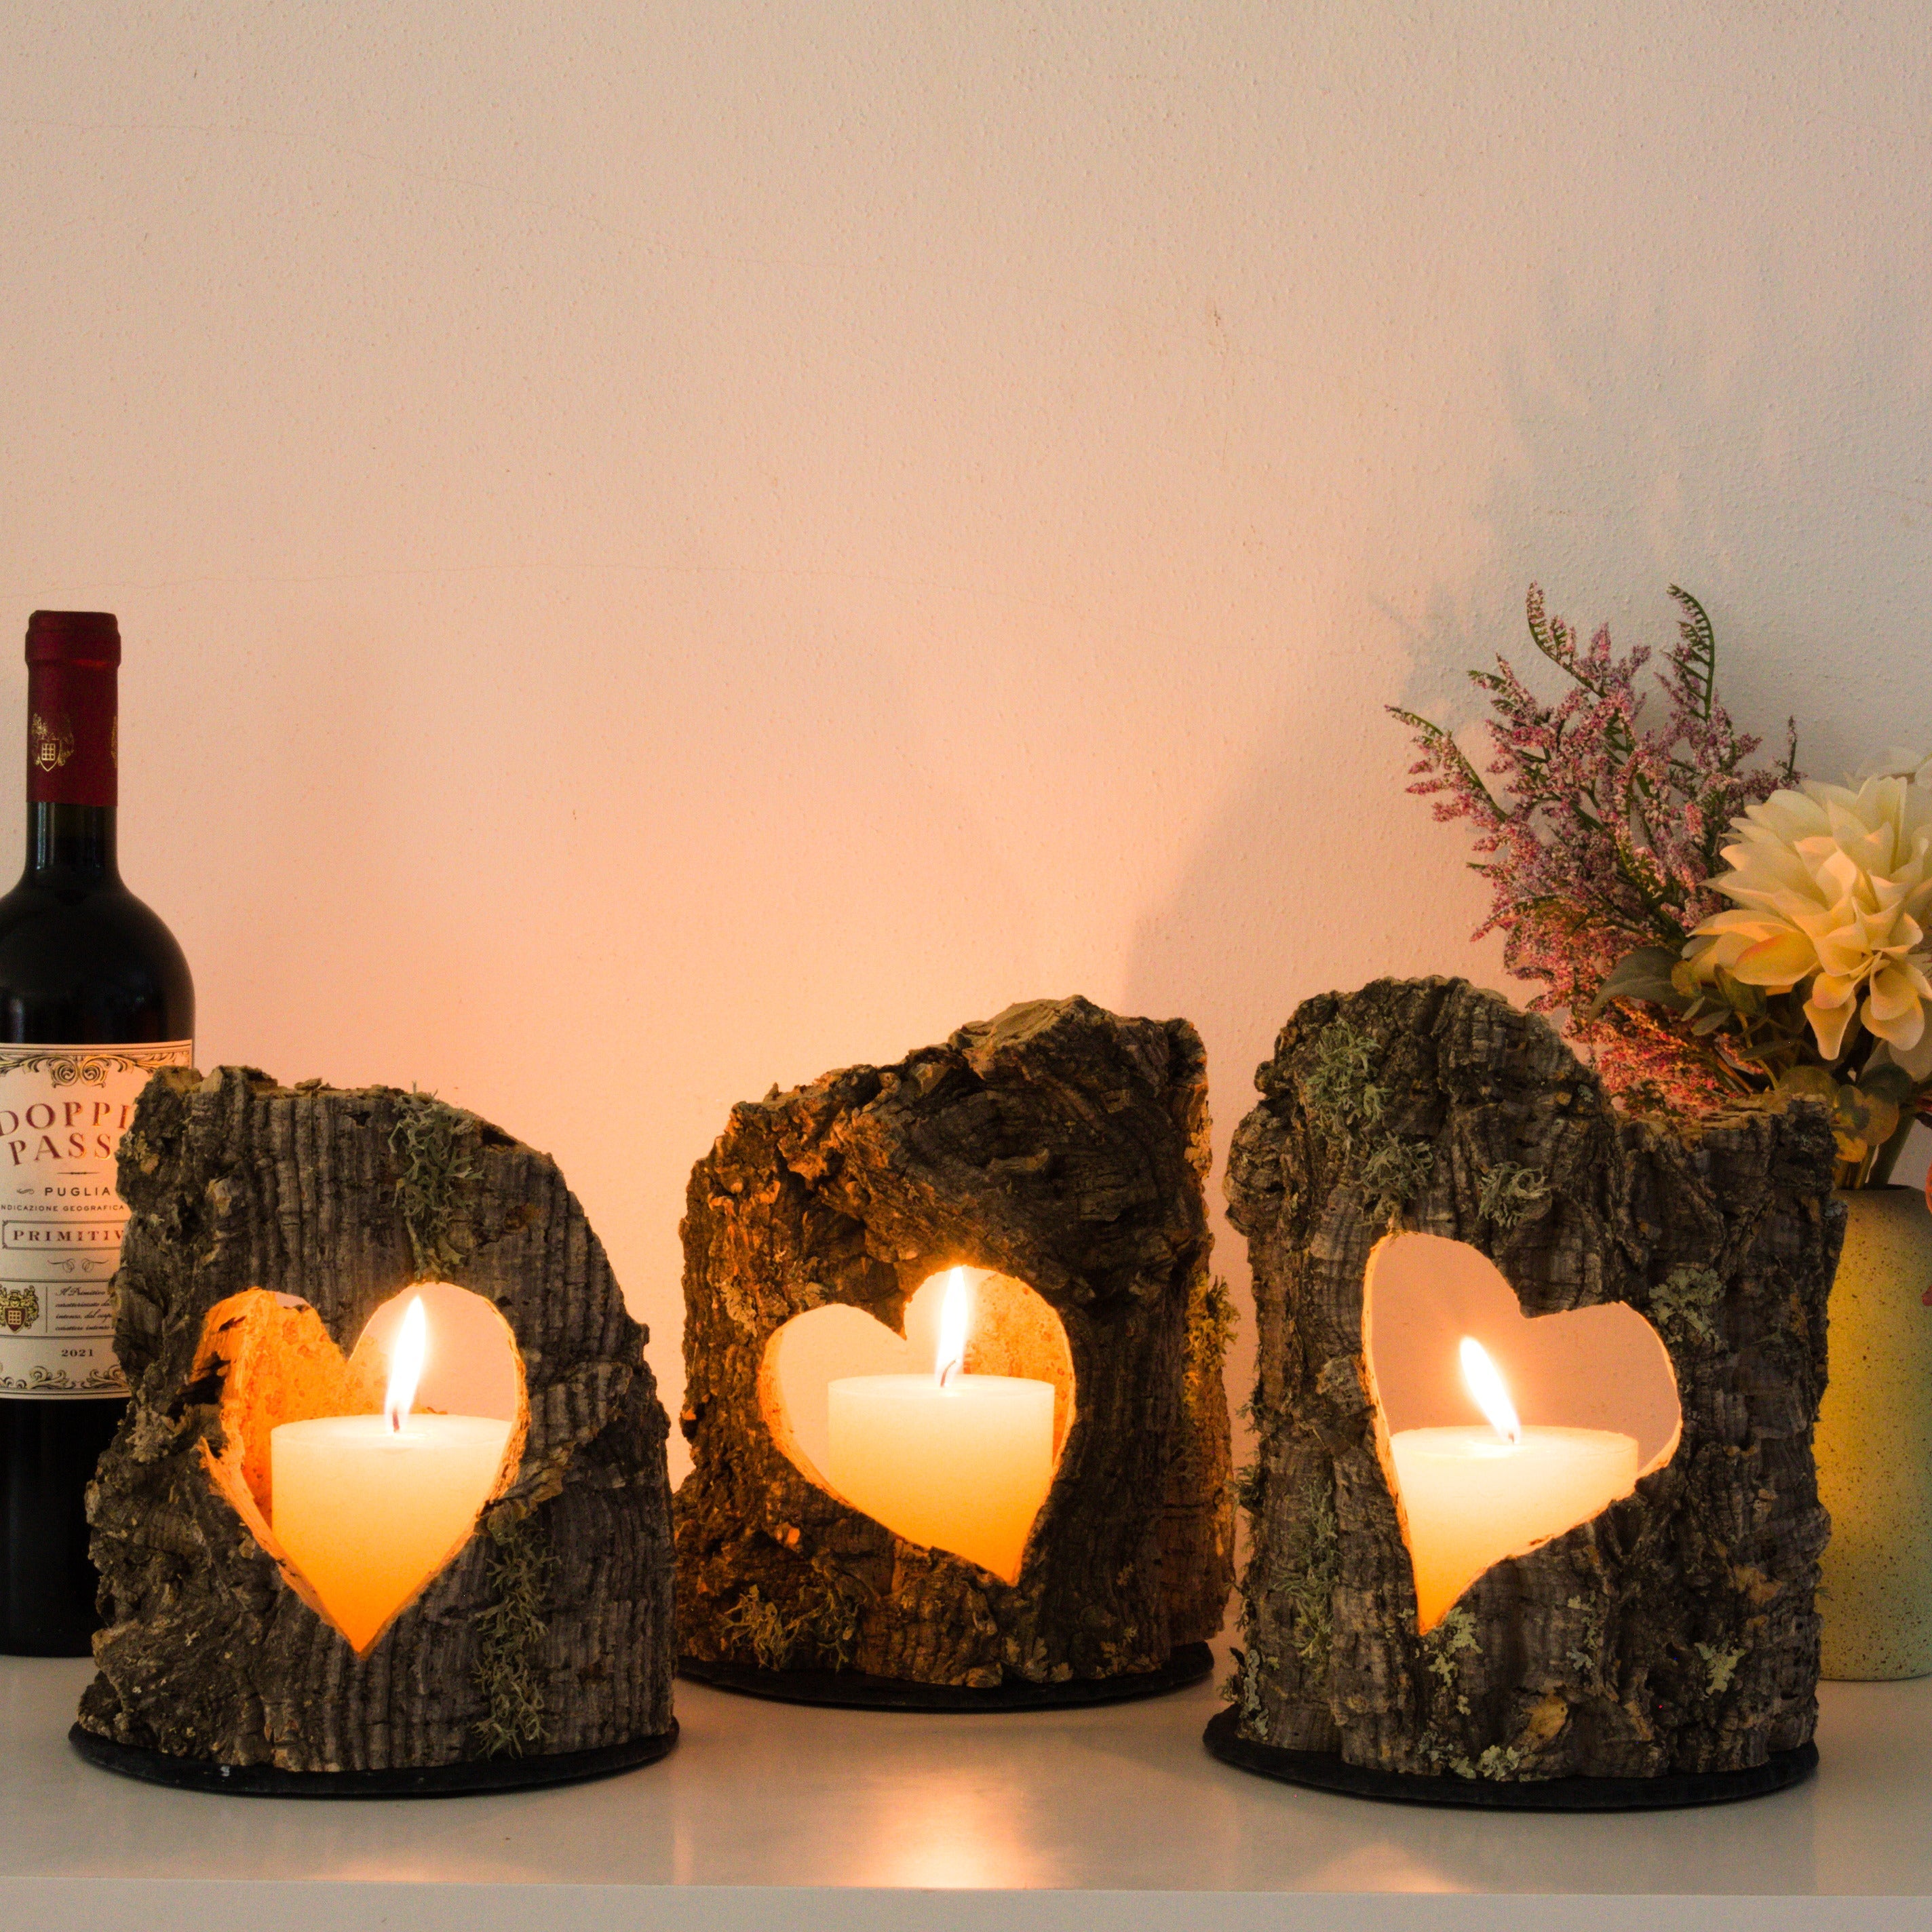 TOP gift idea * verKORKst cork lantern with heart * SPECIAL OFFER from EUR 46.00* unique * fireproof, water-repellent, handmade, sustainable, vegan